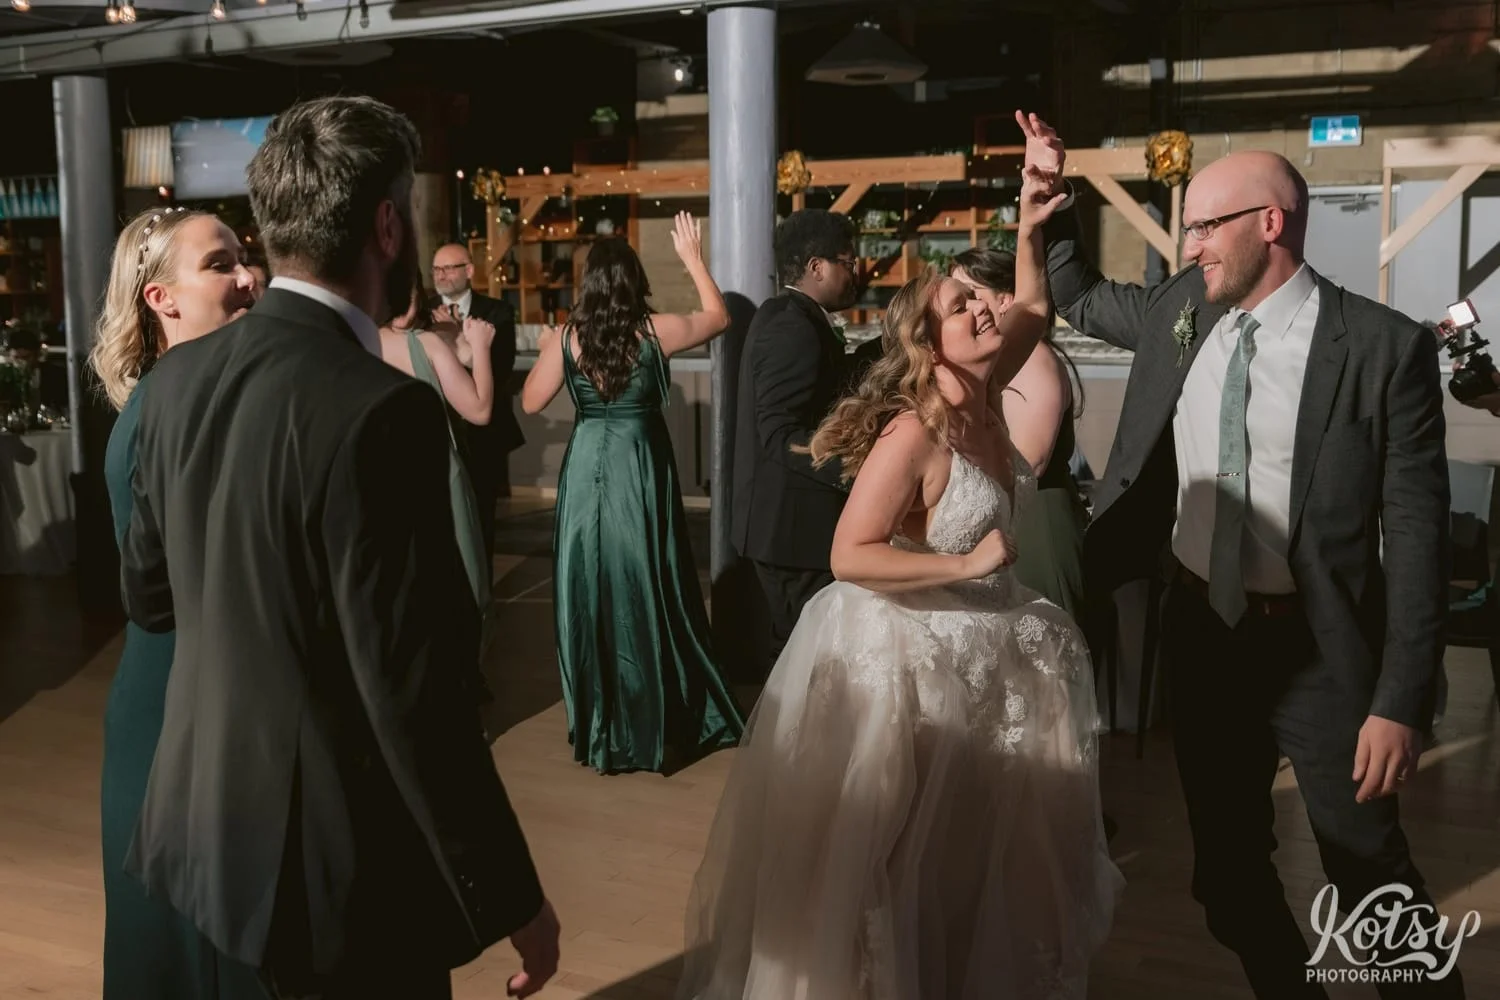 A bride and a white wedding gown and groom in gray shirt and green tie danced with big smiles and a crowd of people during their Second Floor Events wedding reception in Toronto, Canada.